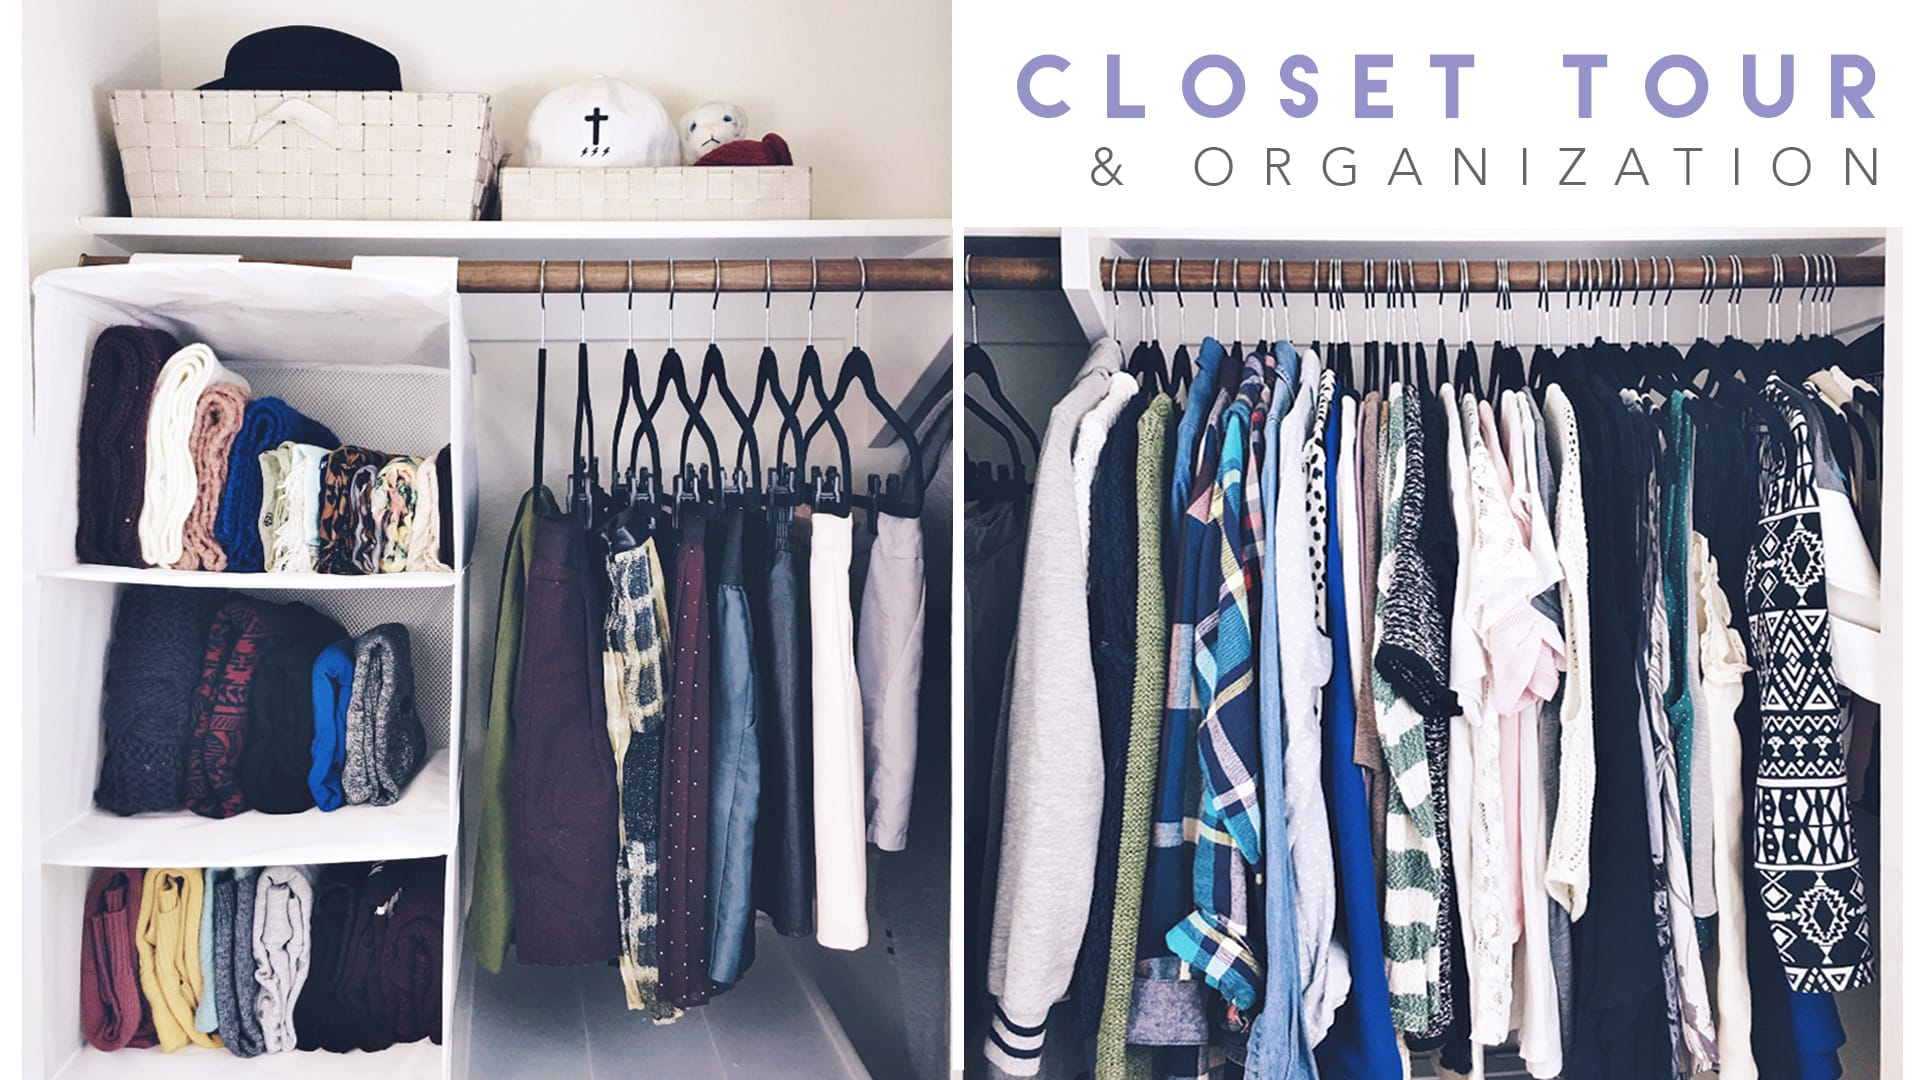 Welcome to the Clothing Closet